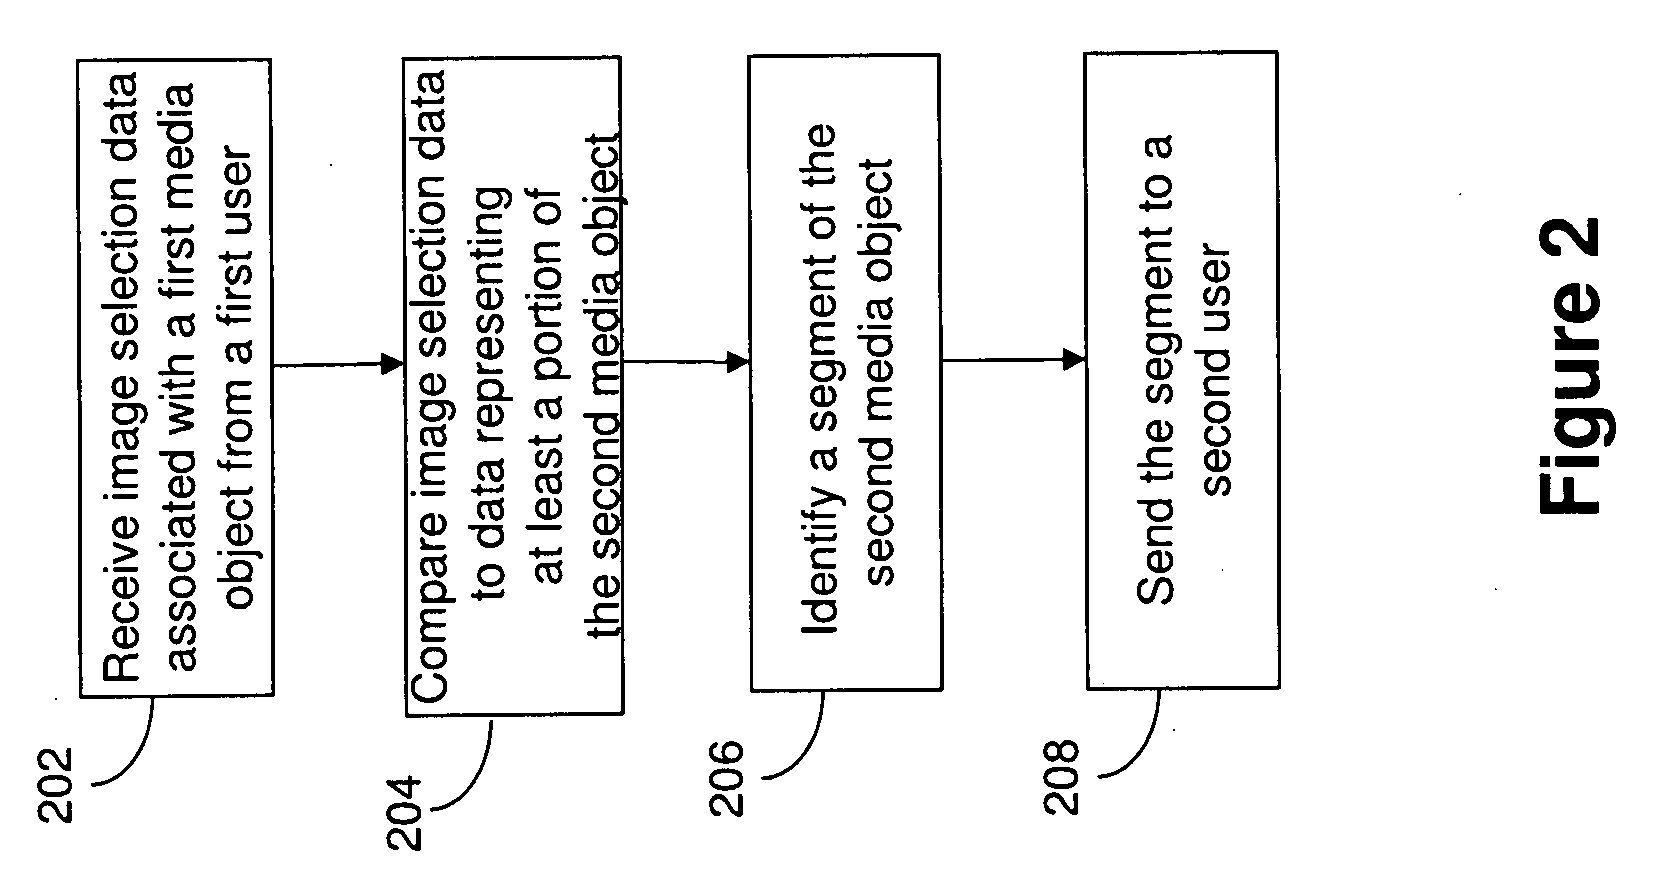 Identification and transfer of a media object segment from one communications network to another